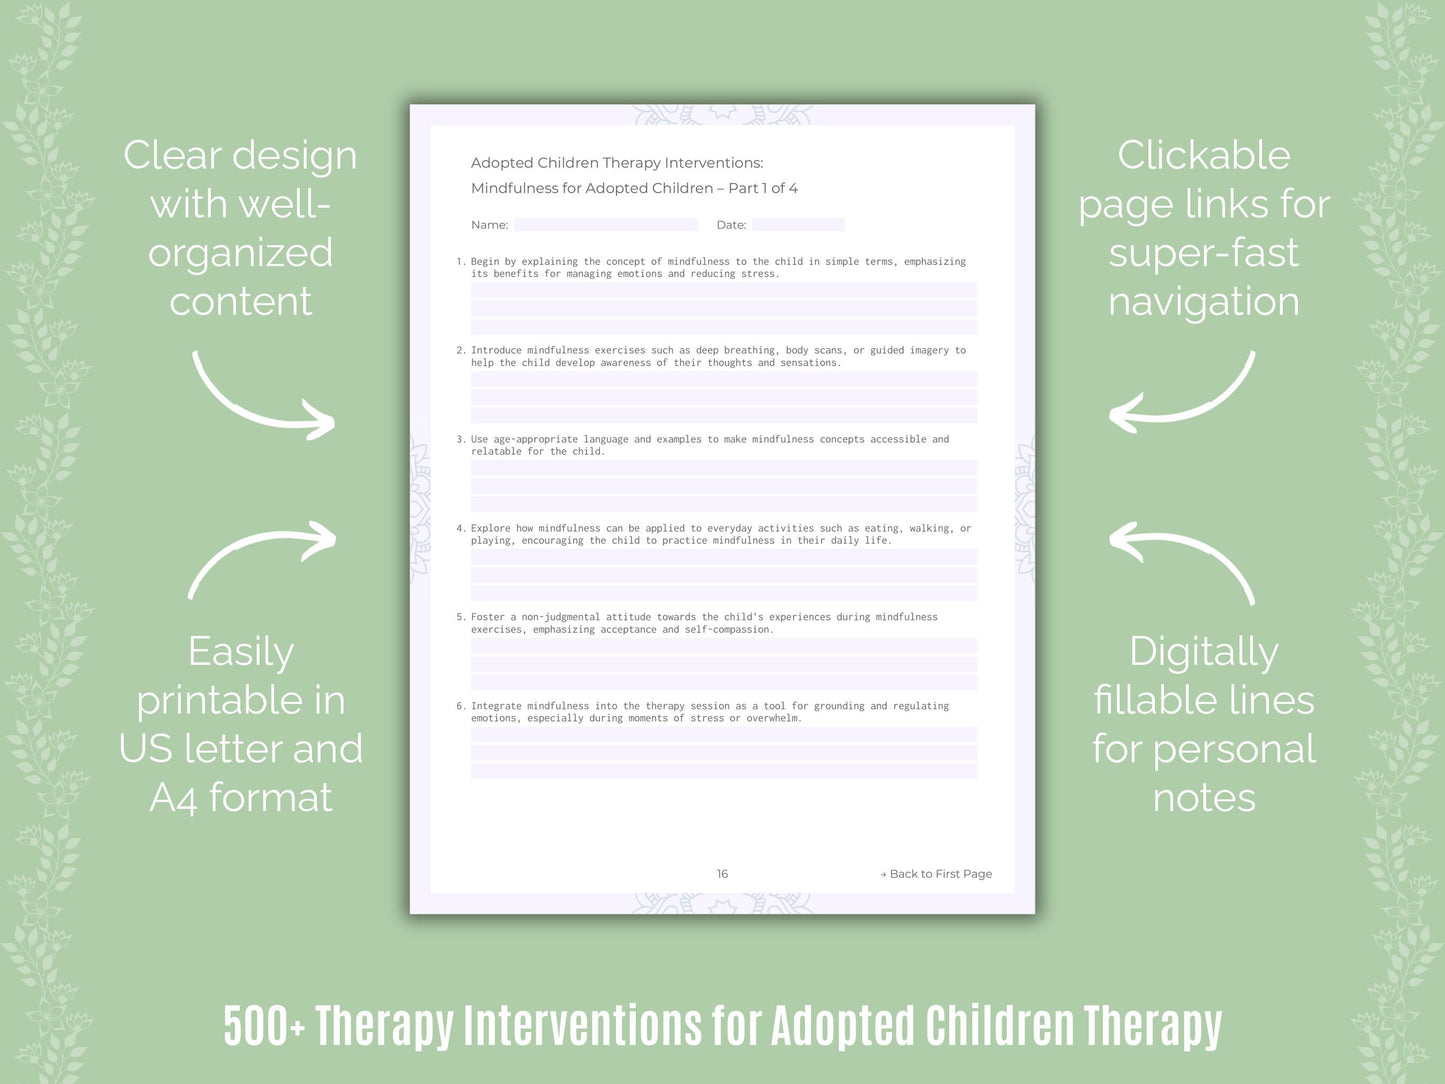 Adopted Children Therapy Interventions Resource